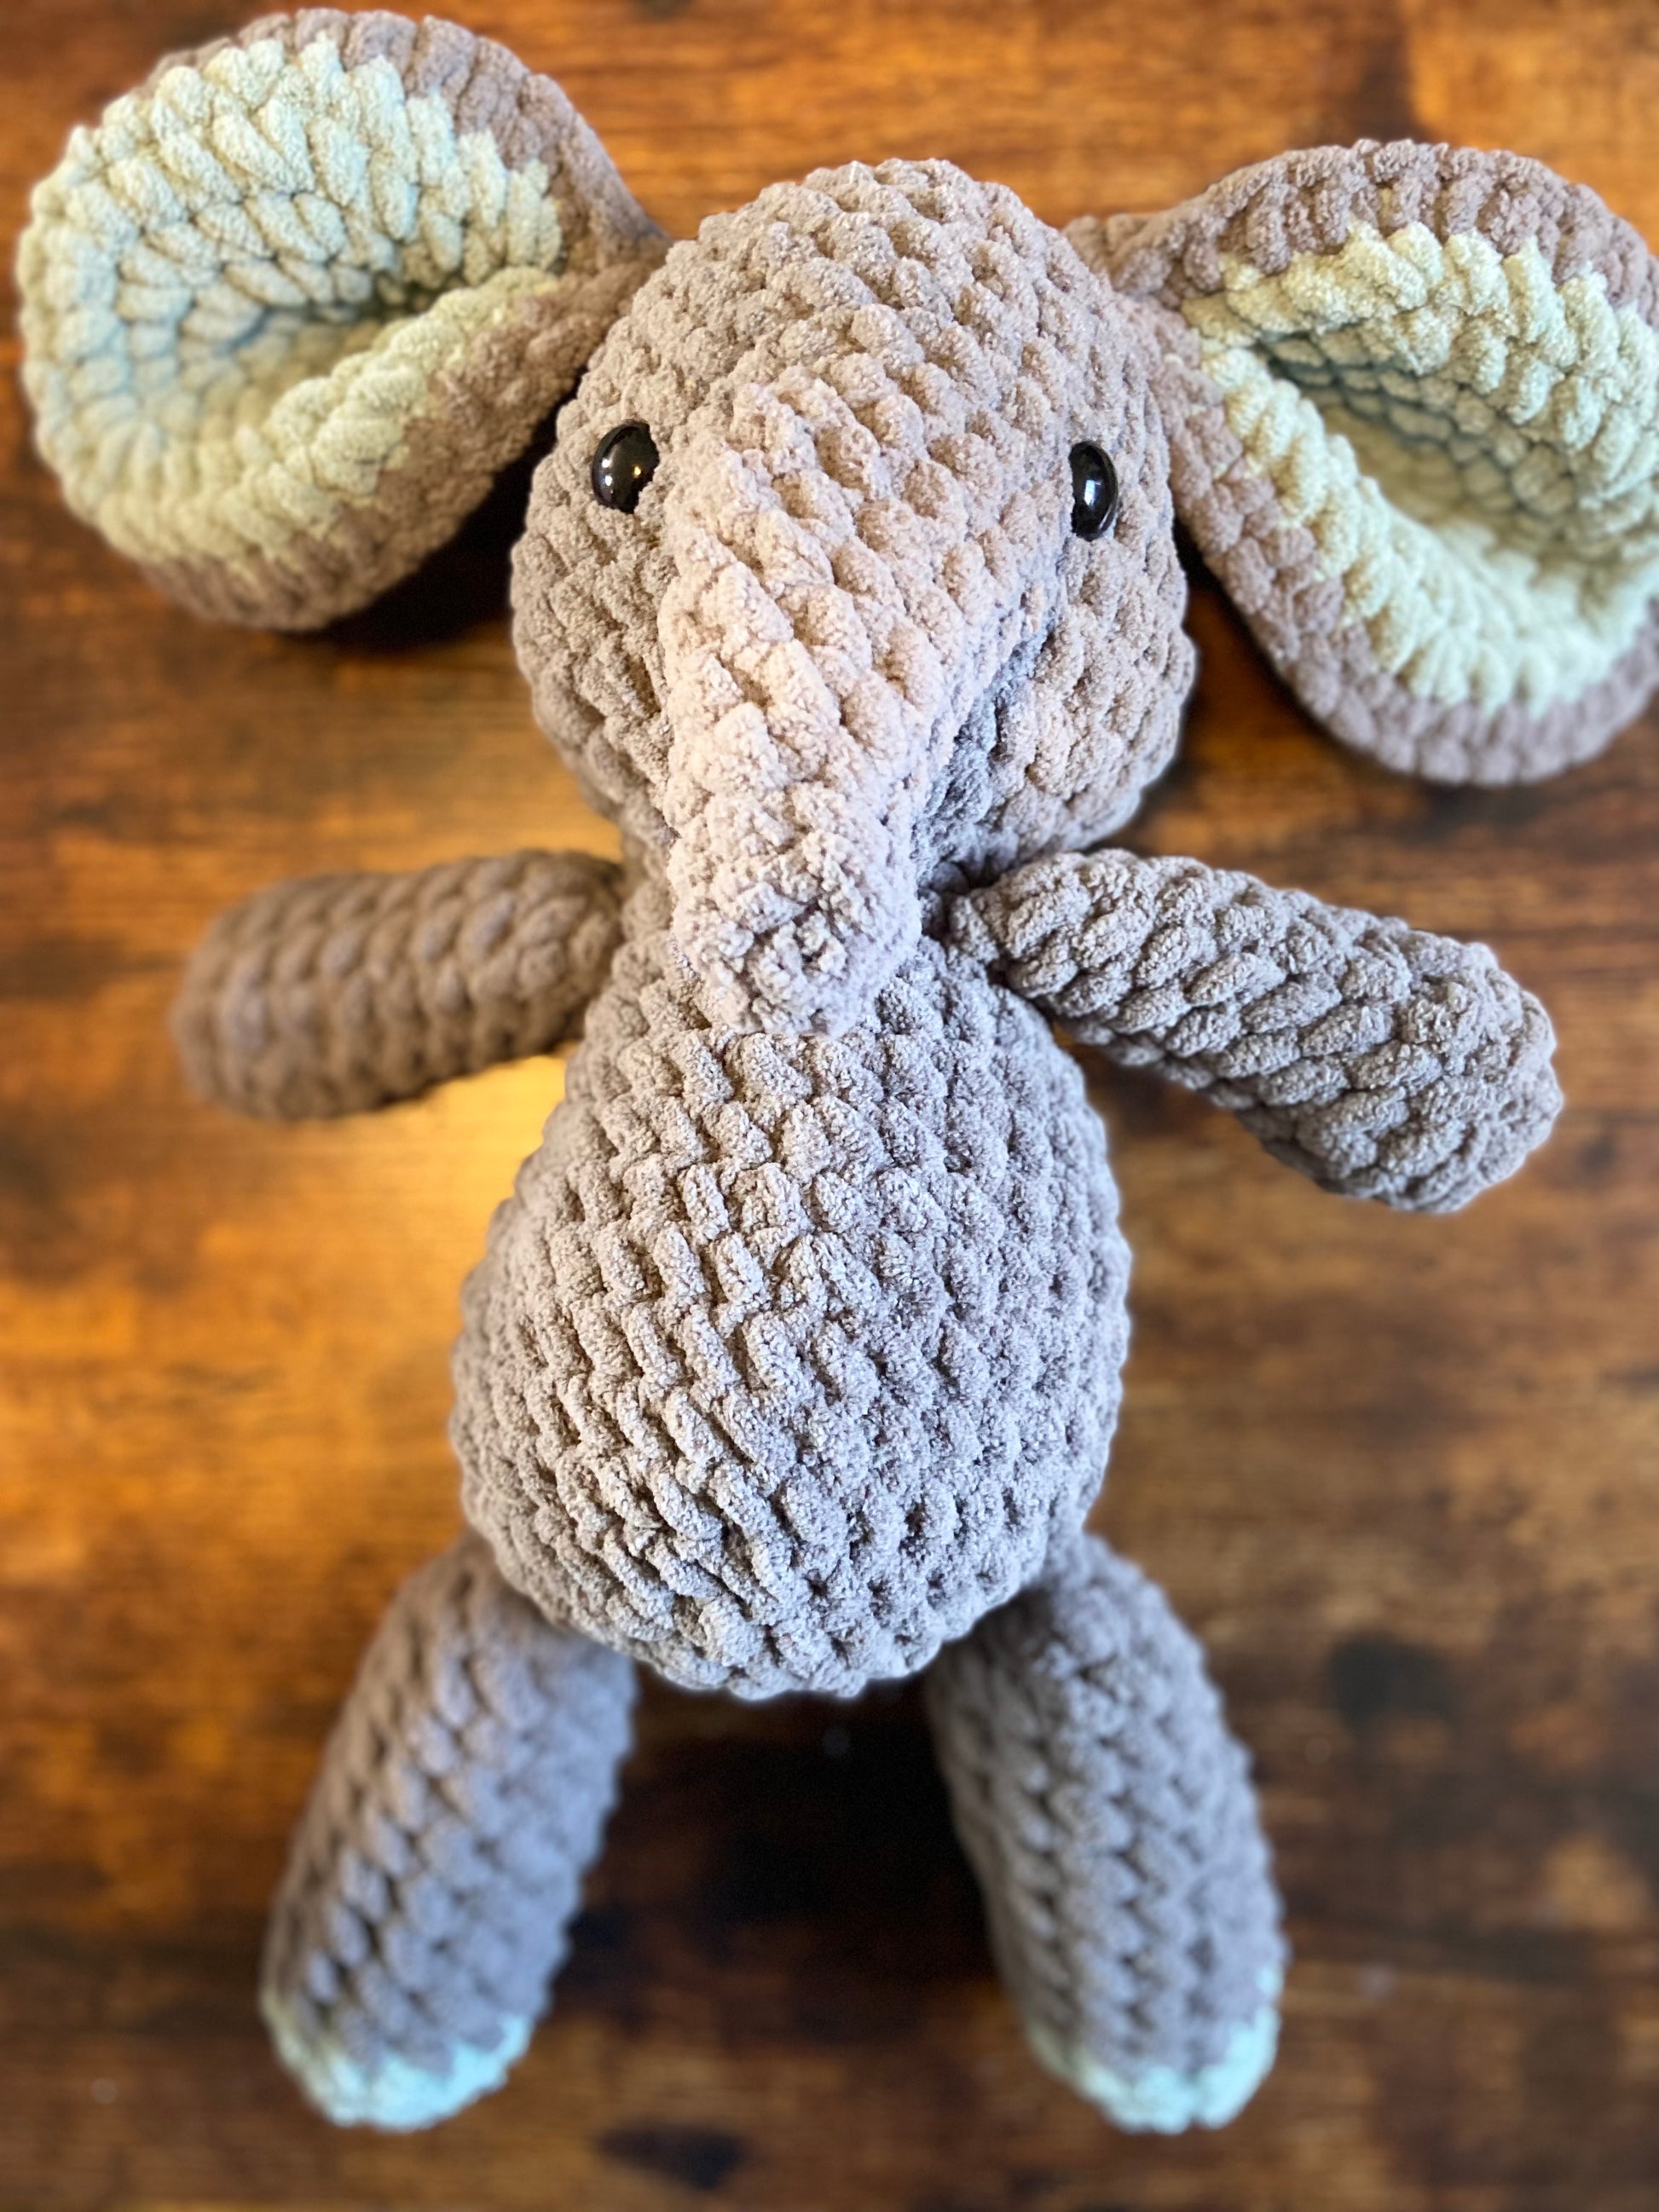 Crochet elephant: A handmade amigurumi elephant with gray body, floppy ears, and a gentle expression, ideal for cuddling and decorating.